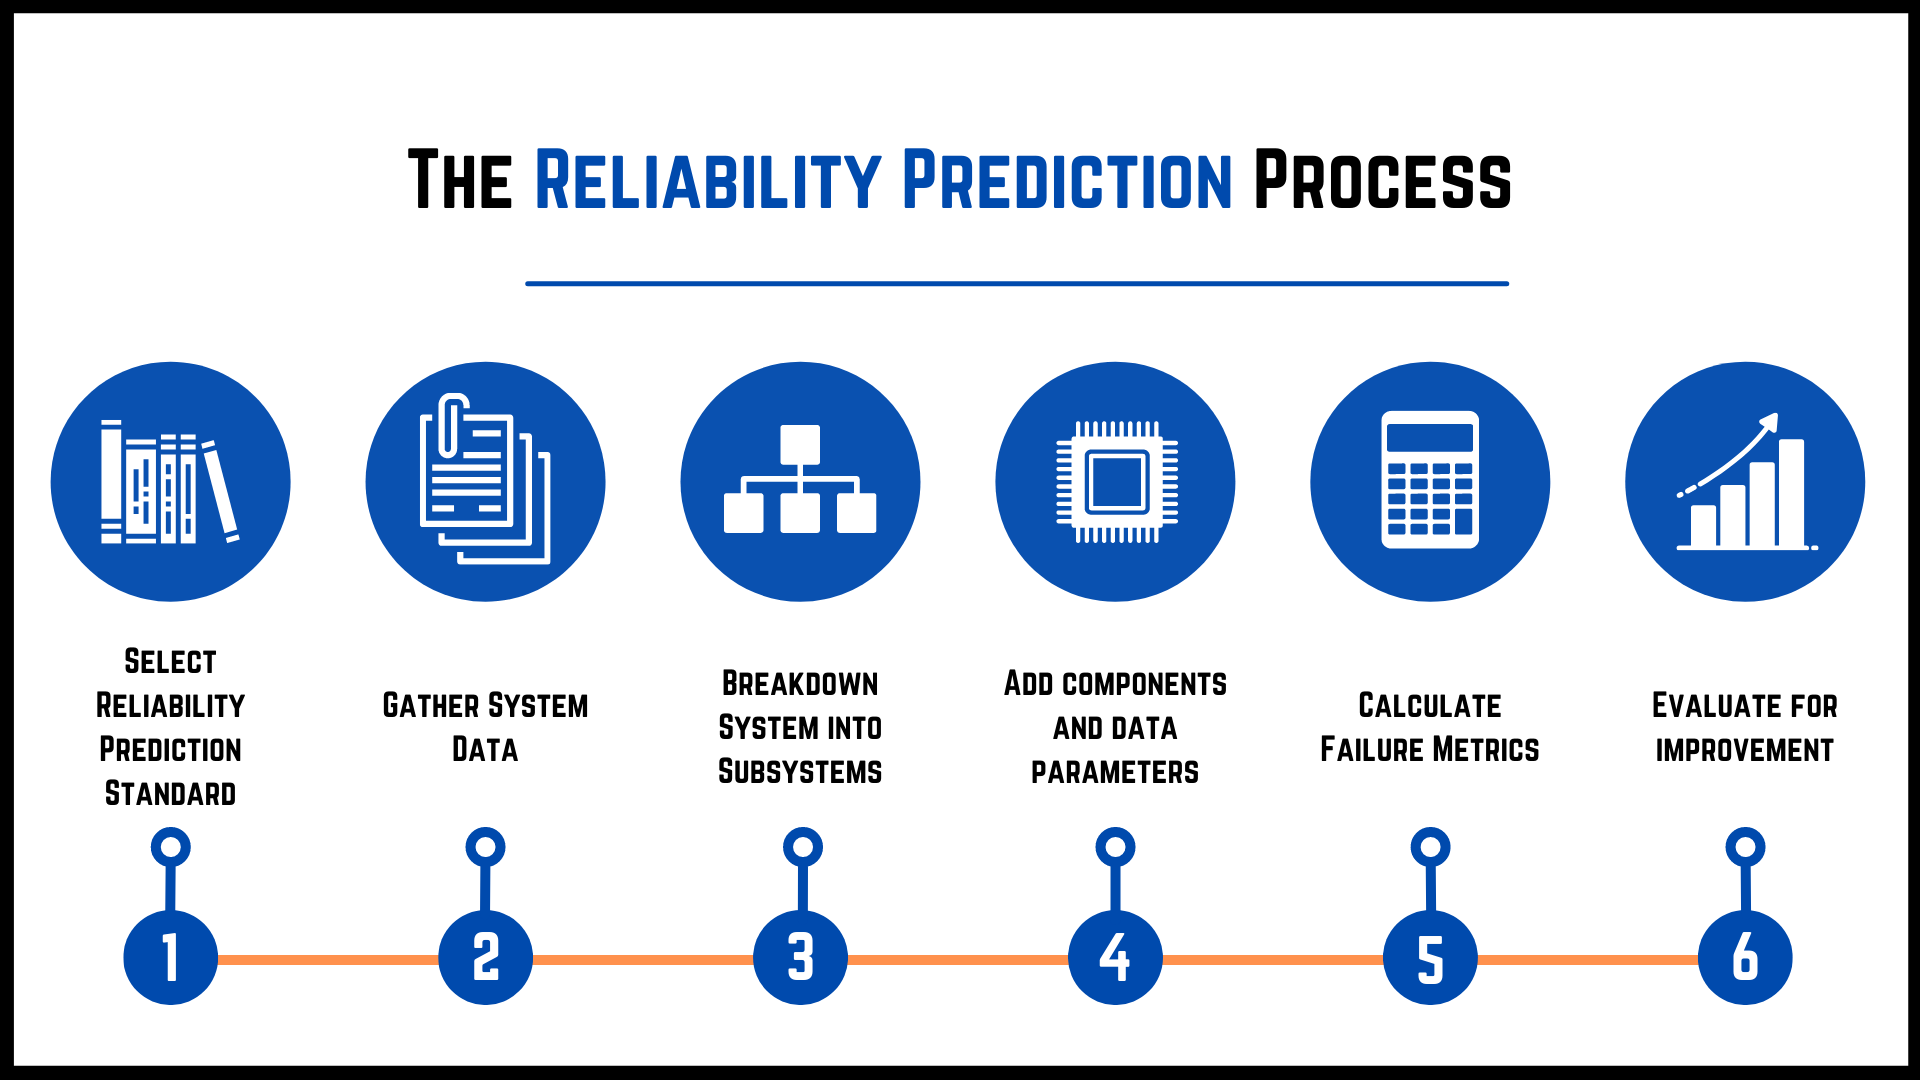 6 Steps of the Reliability Prediction Process